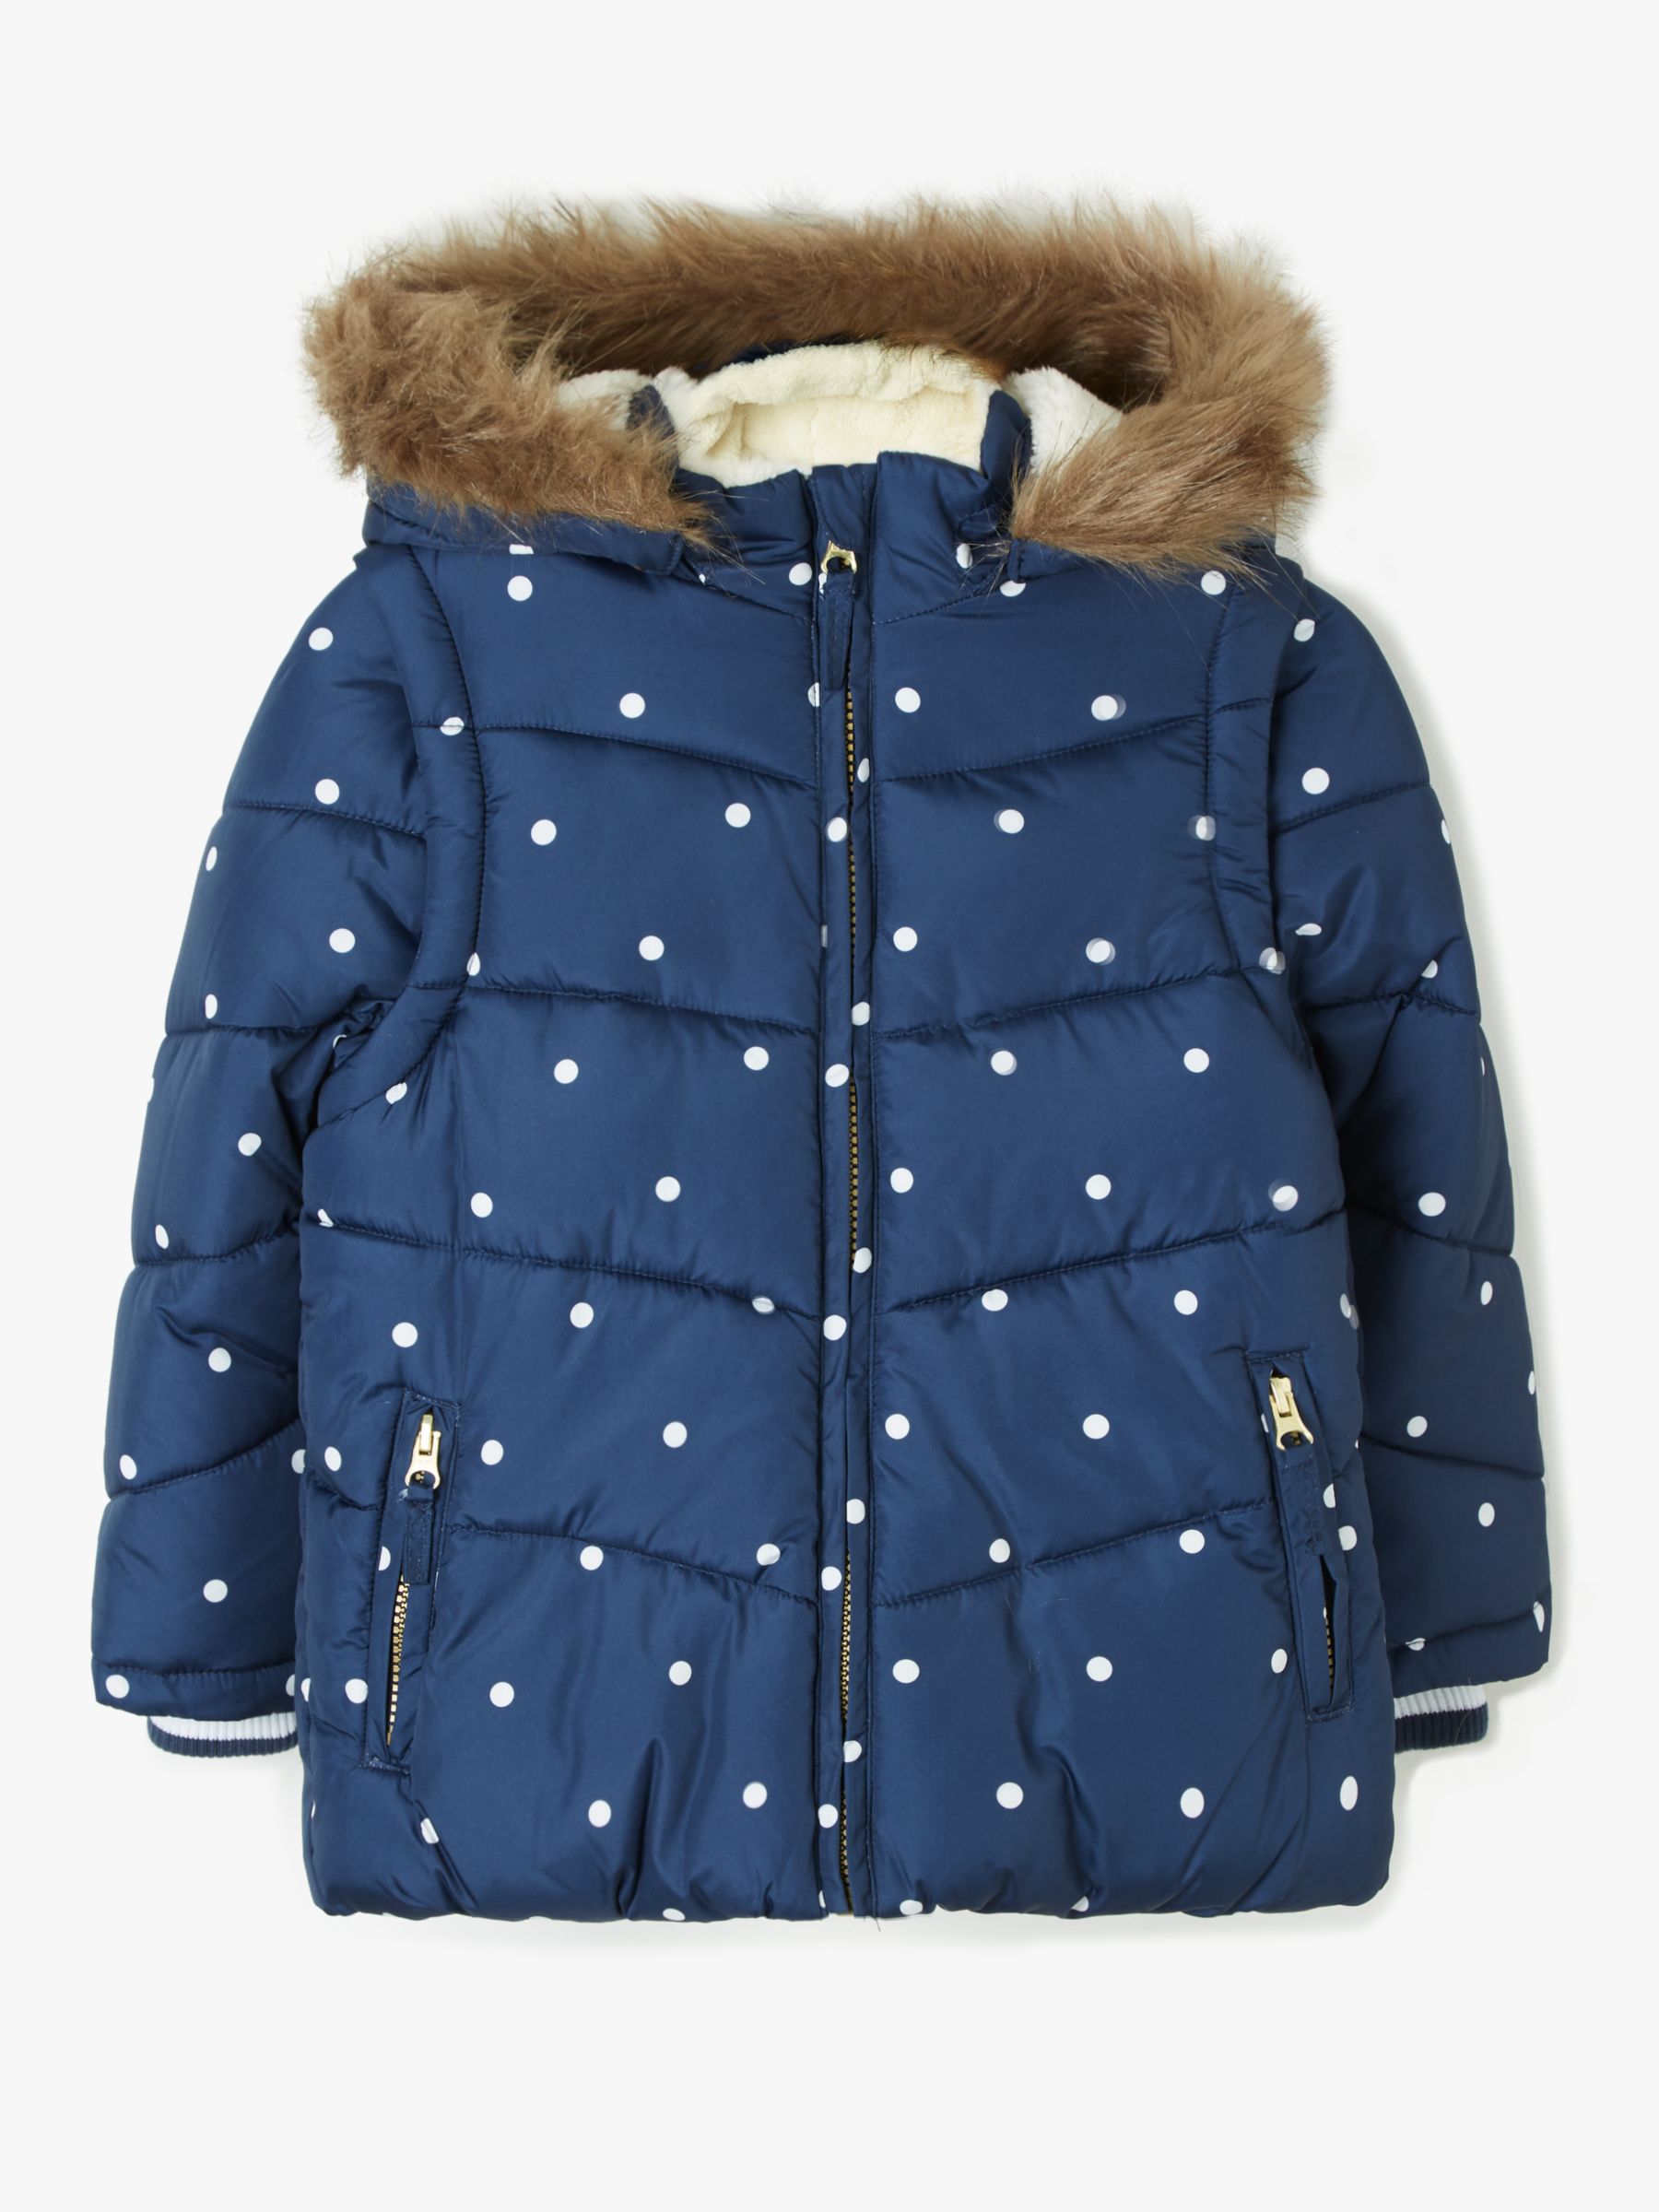 John Lewis & Partners Girls' Padded 2-in-1 Spotted Coat, Navy